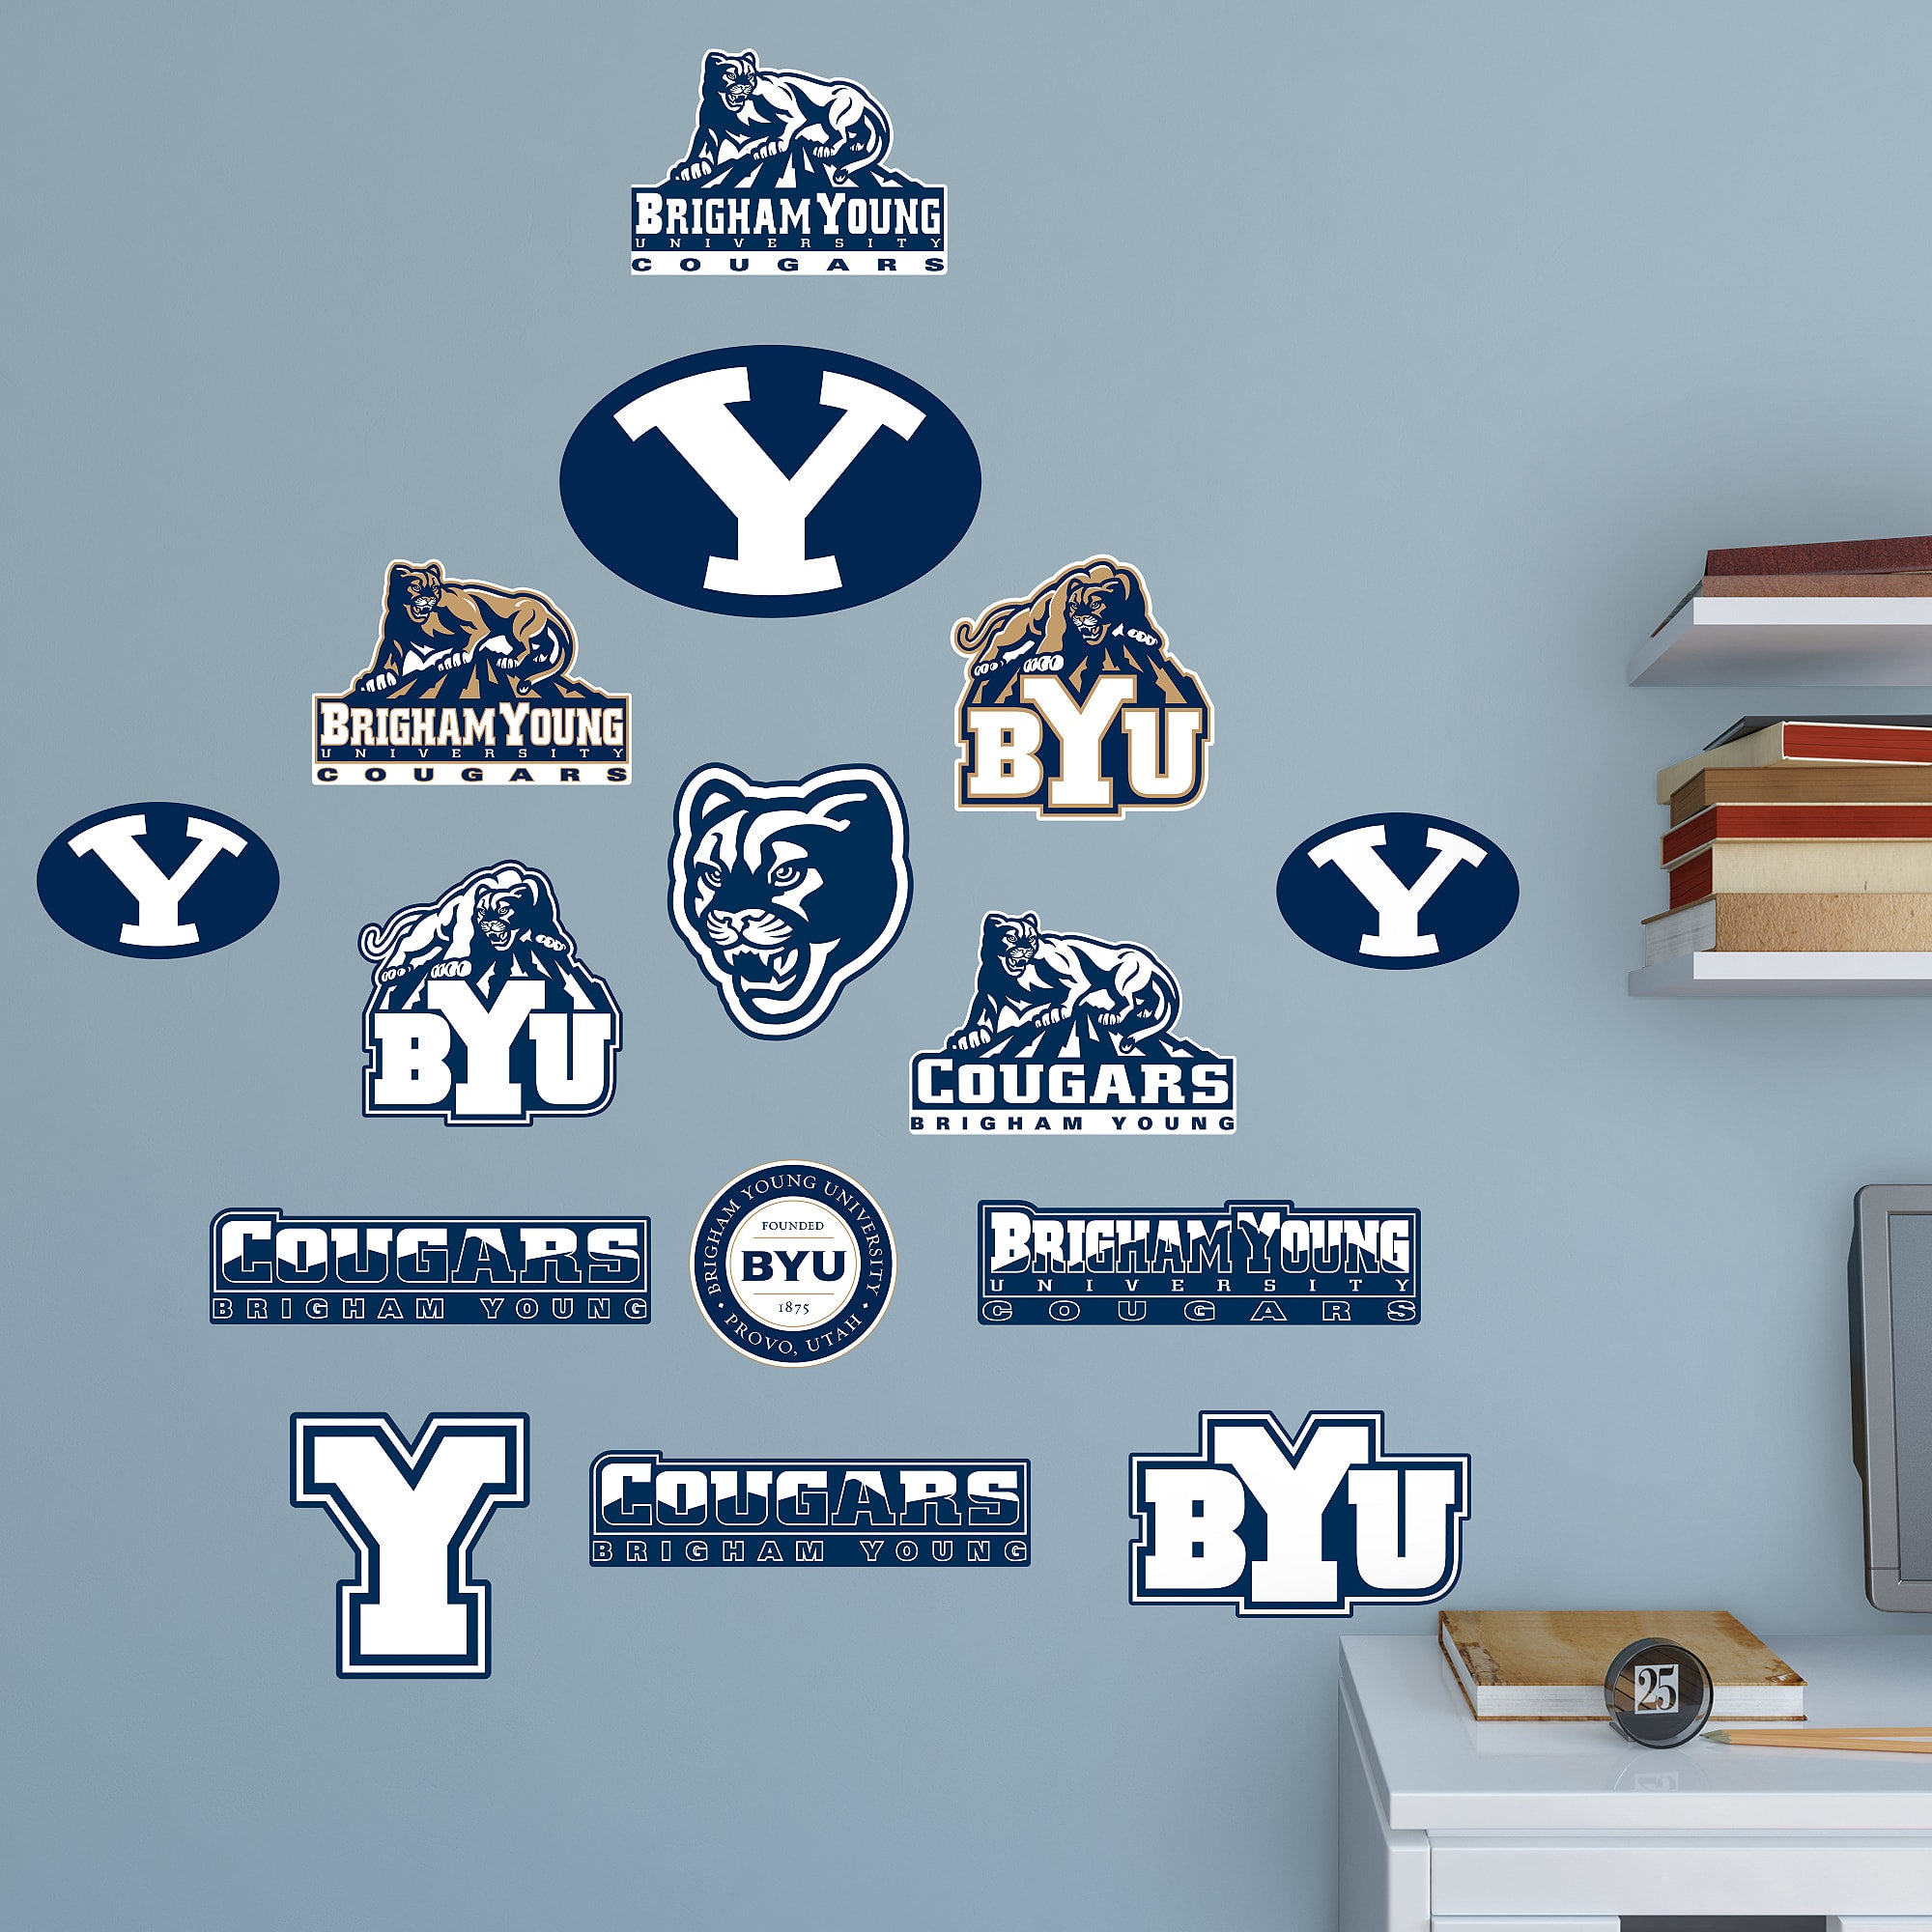 BYU Cougars: Logo Assortment - Officially Licensed Removable Wall Decals 75"W x 39.5"H by Fathead | Vinyl